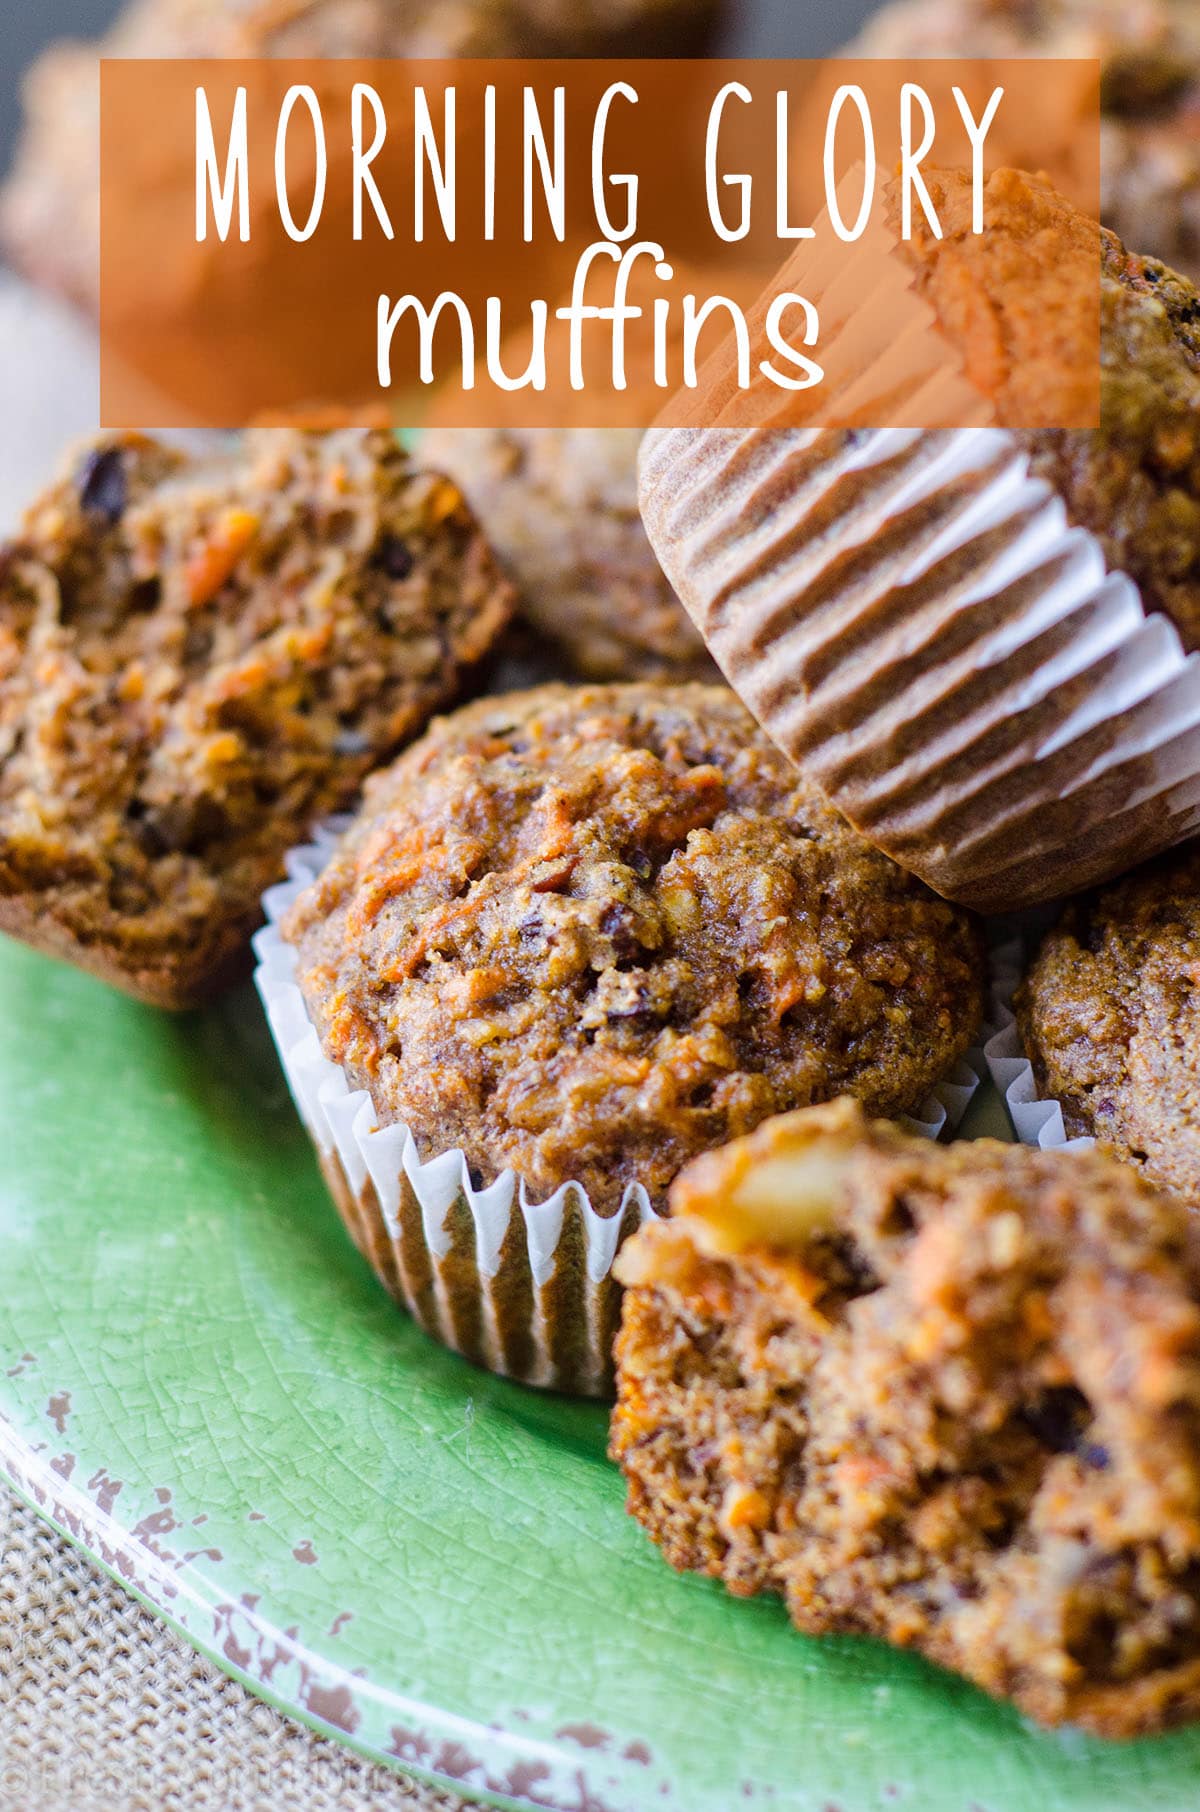 Morning Glory Muffins: Hearty whole wheat muffins packed with fruits, vegetables, nuts, and flaxseed to fill you up at breakfast time. via @frshaprilflours